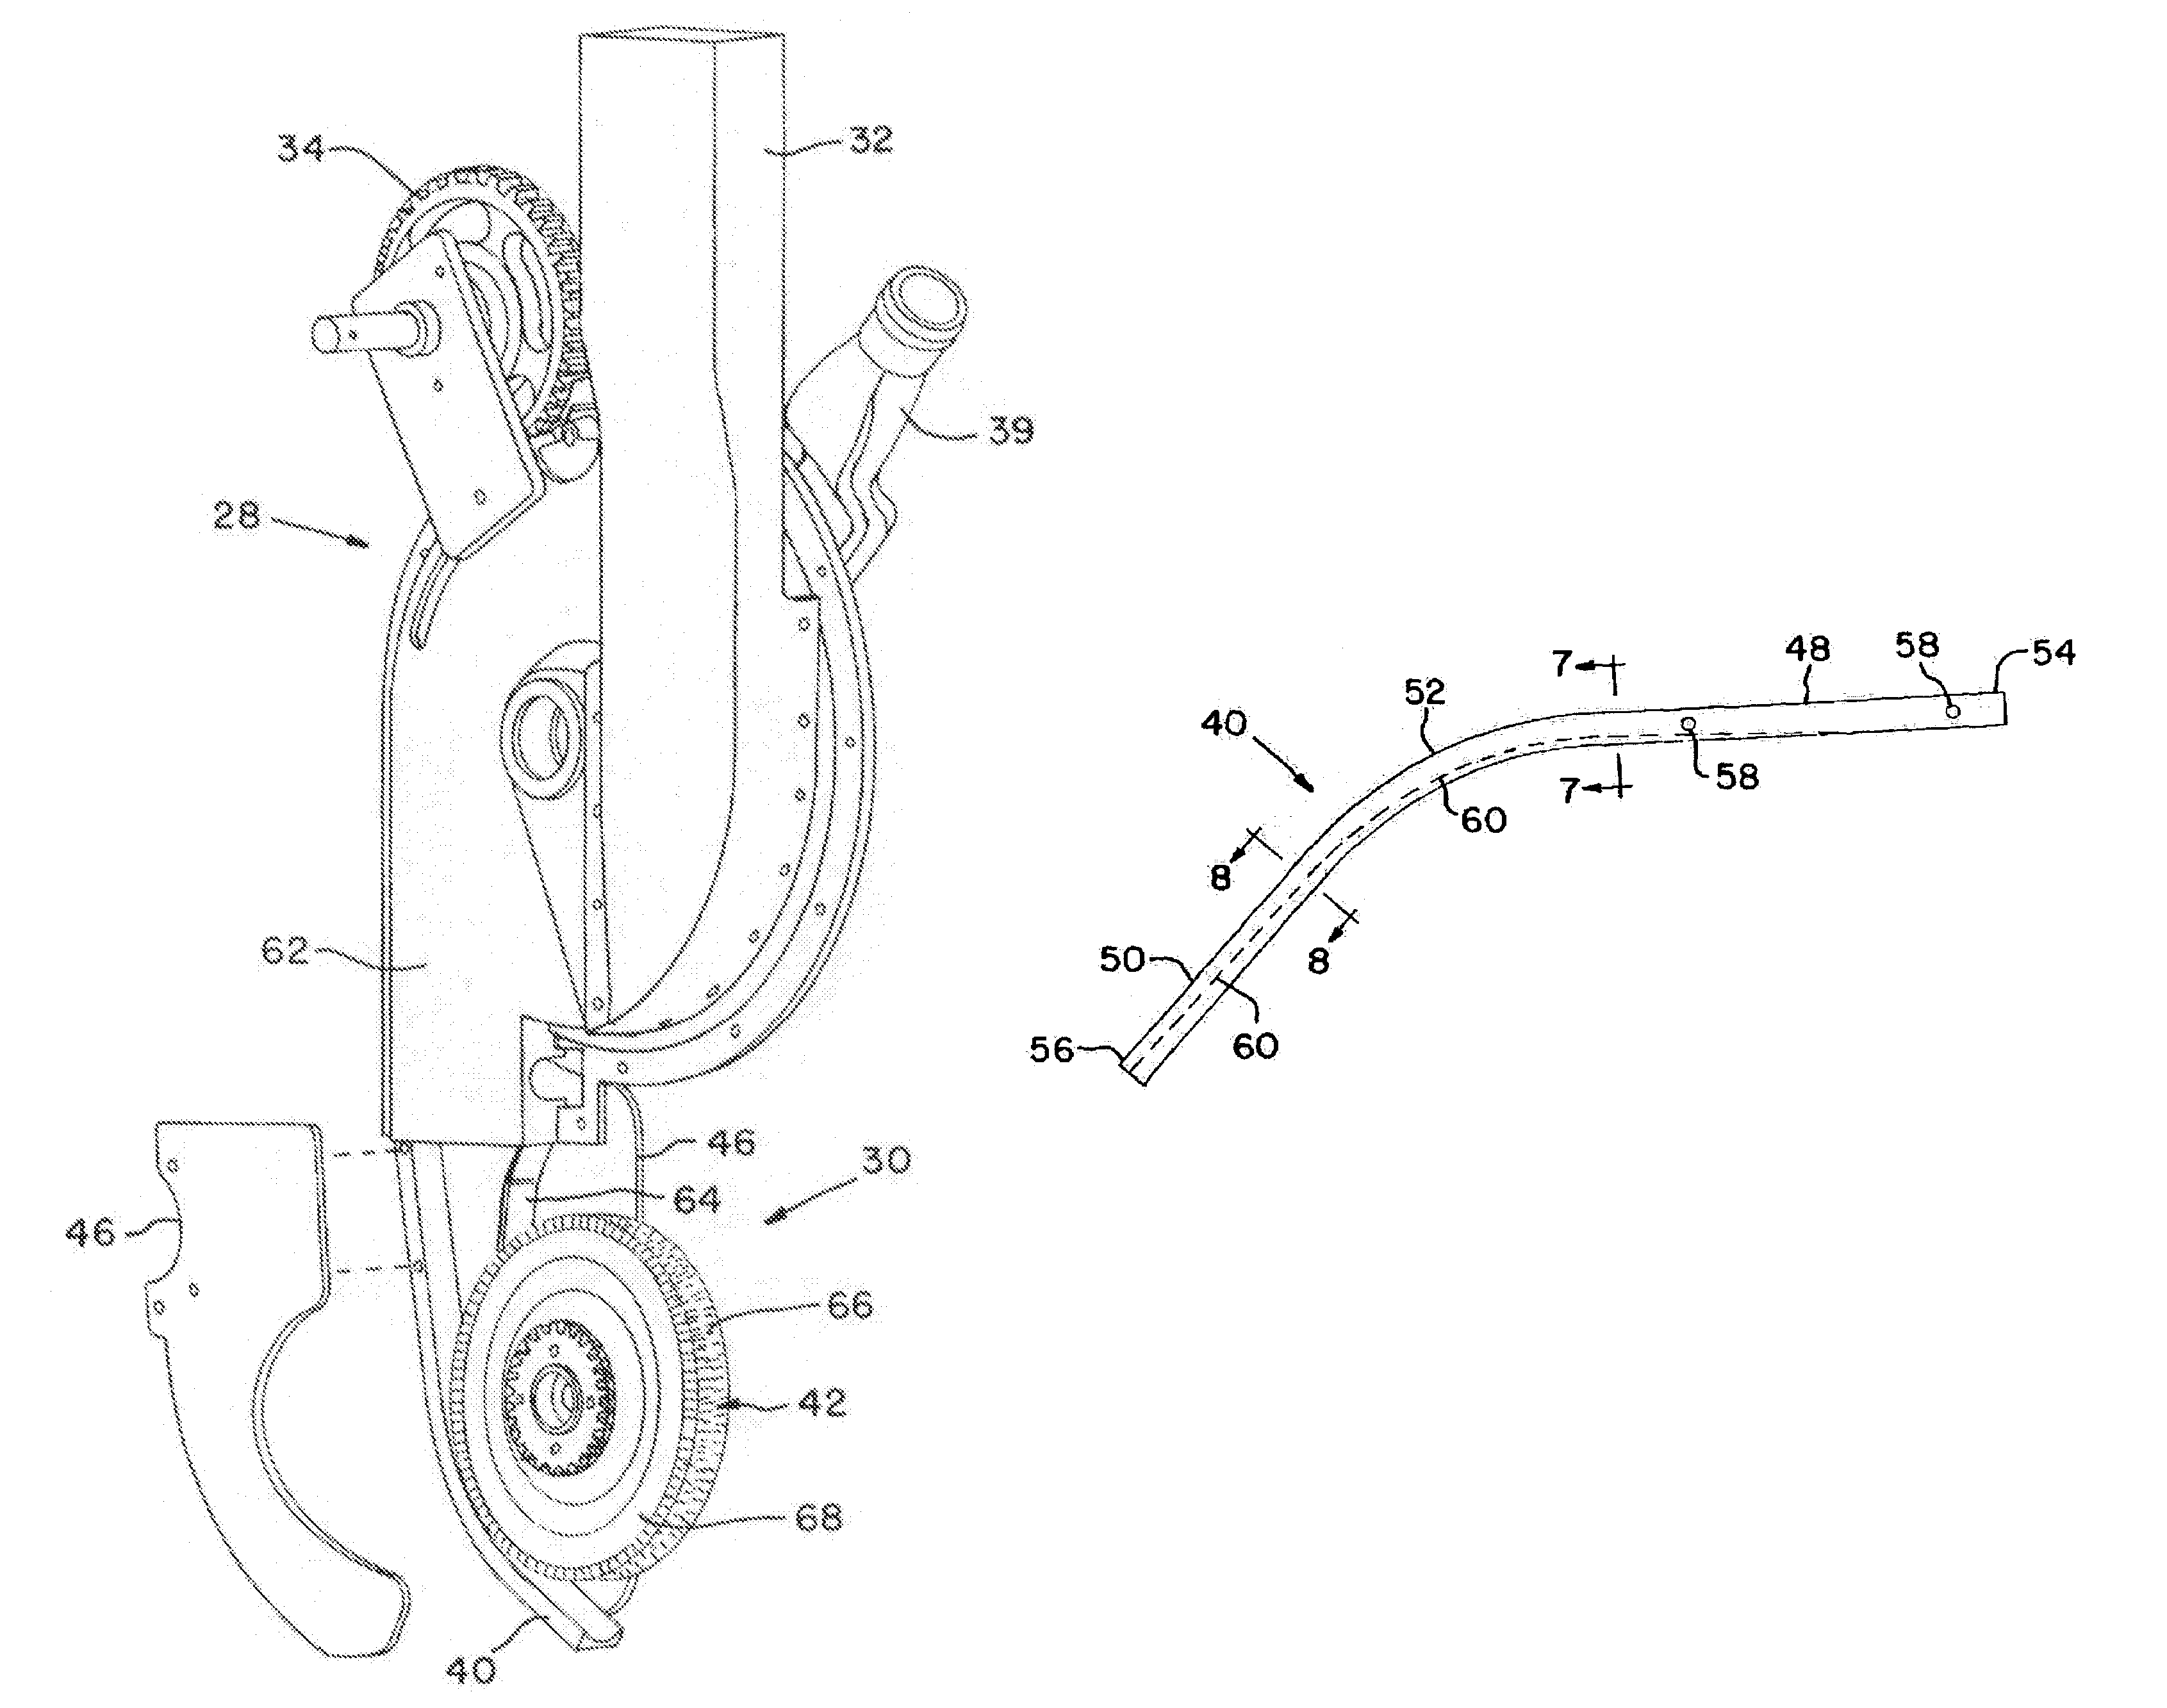 Seed slide for use in an agricultural seeding machine